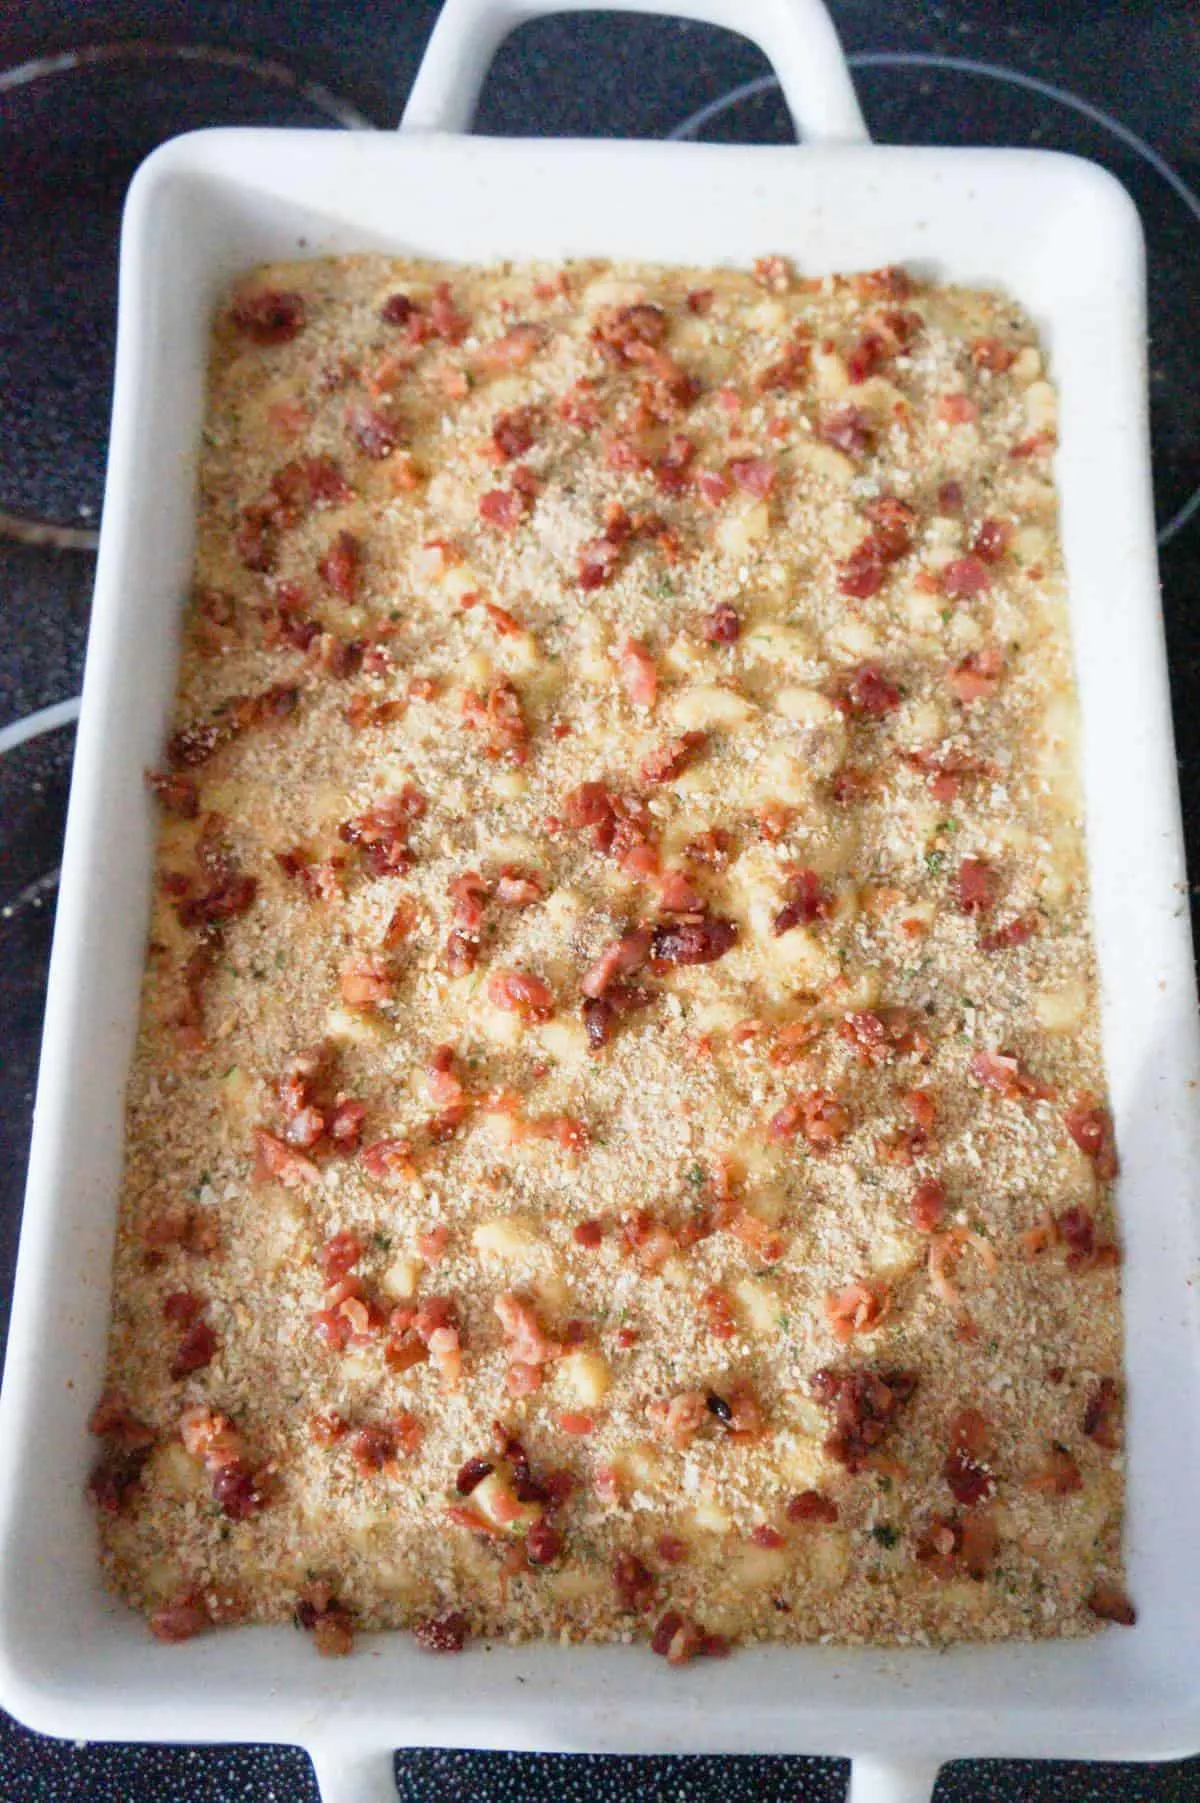 crumbled bacon and bread crumbs on top of mac and cheese before baking